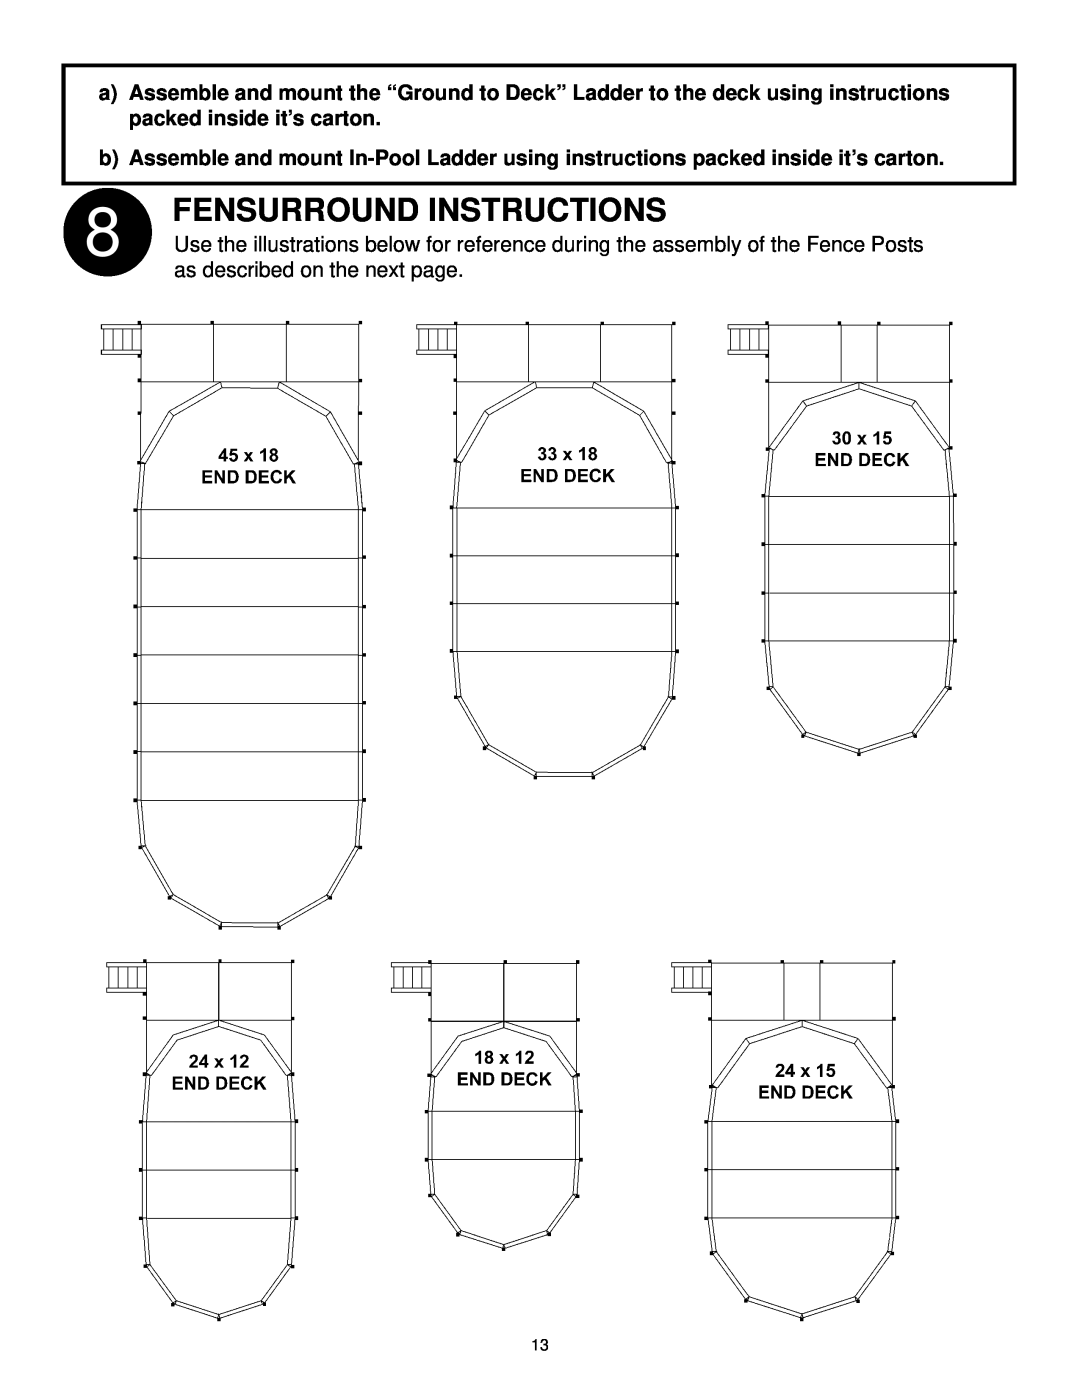 Swim'n Play end deck manual Fensurround Instructions, as described on the next page 